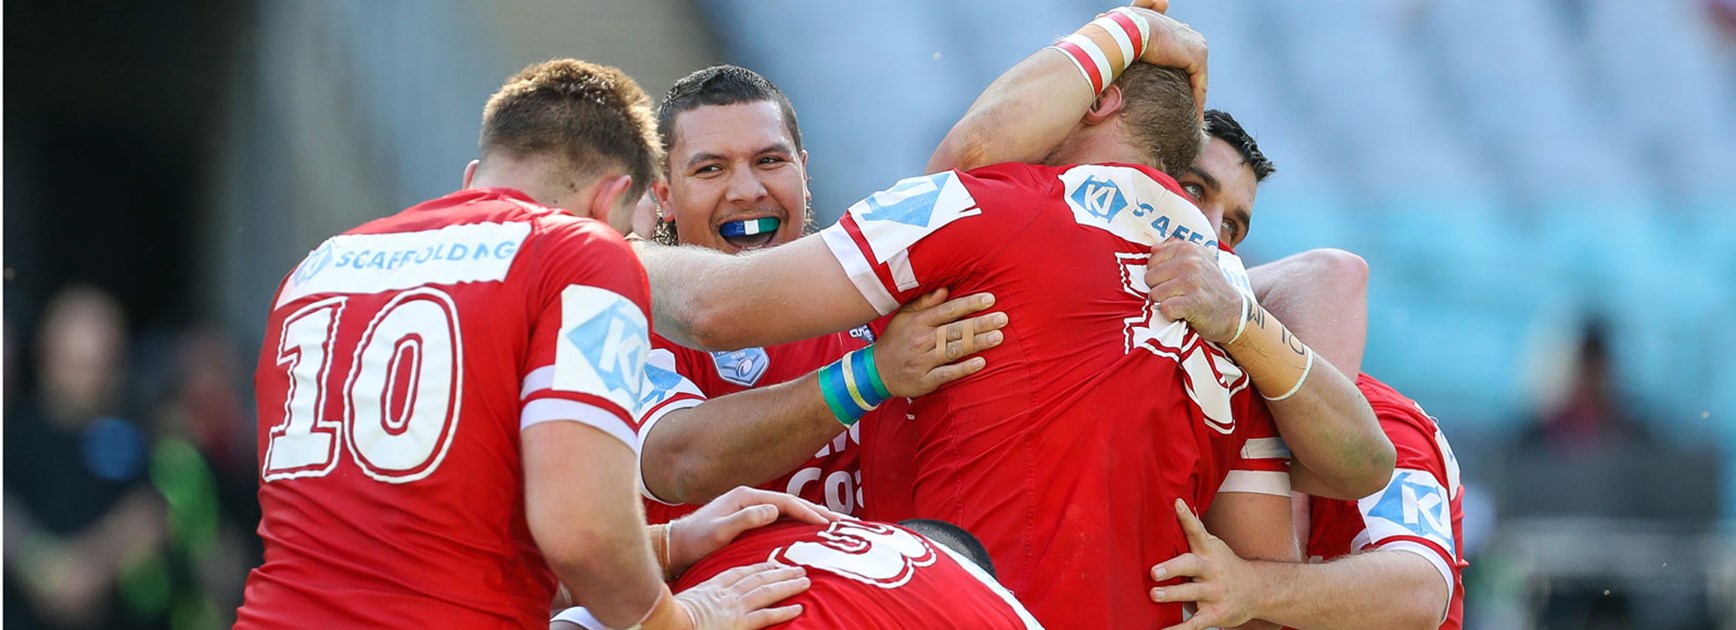 Cutters players celebrate their big Intrust Super Championship win over the Bears.